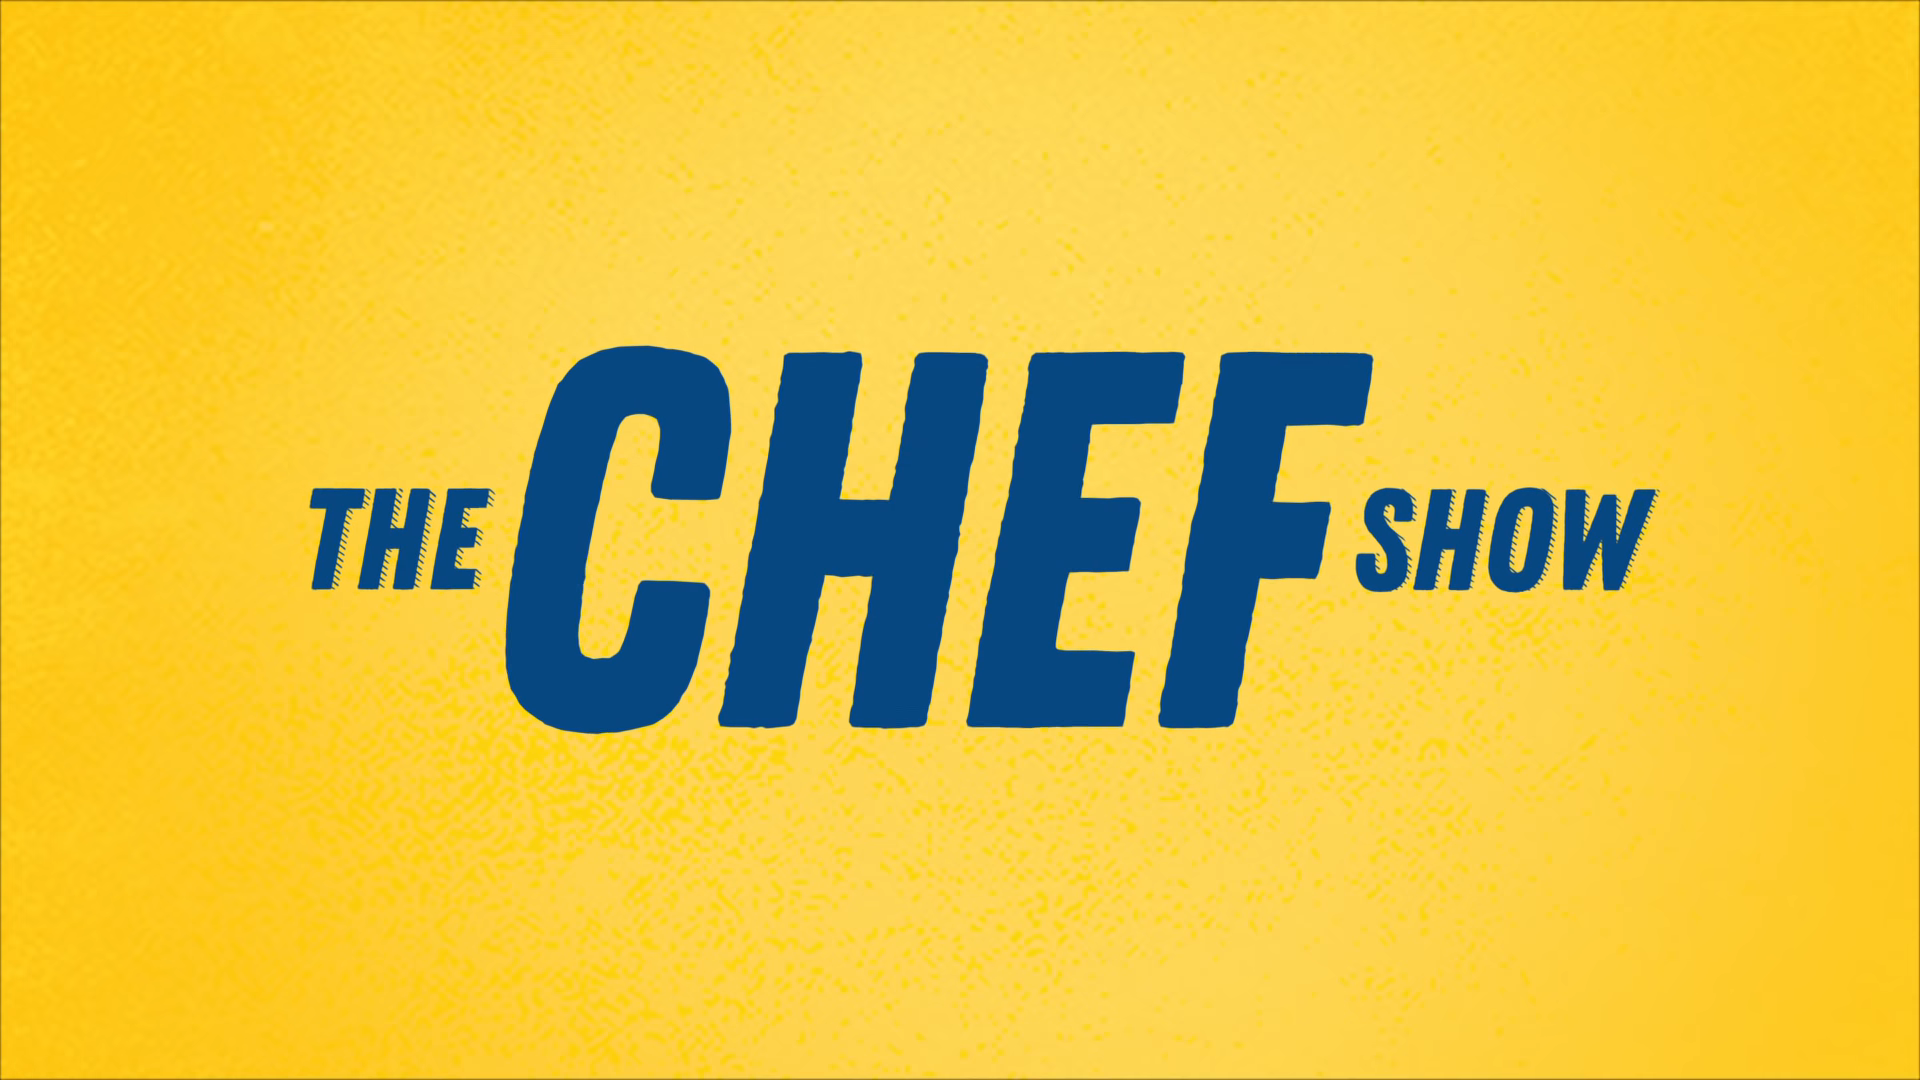 The Chef Show Netflix Trailer, Netflix Food Shows, Netflix Trailers, Coming to Netflix in June, Best Netflix Shows, Netflix Food Series, Netflix Reality Shows